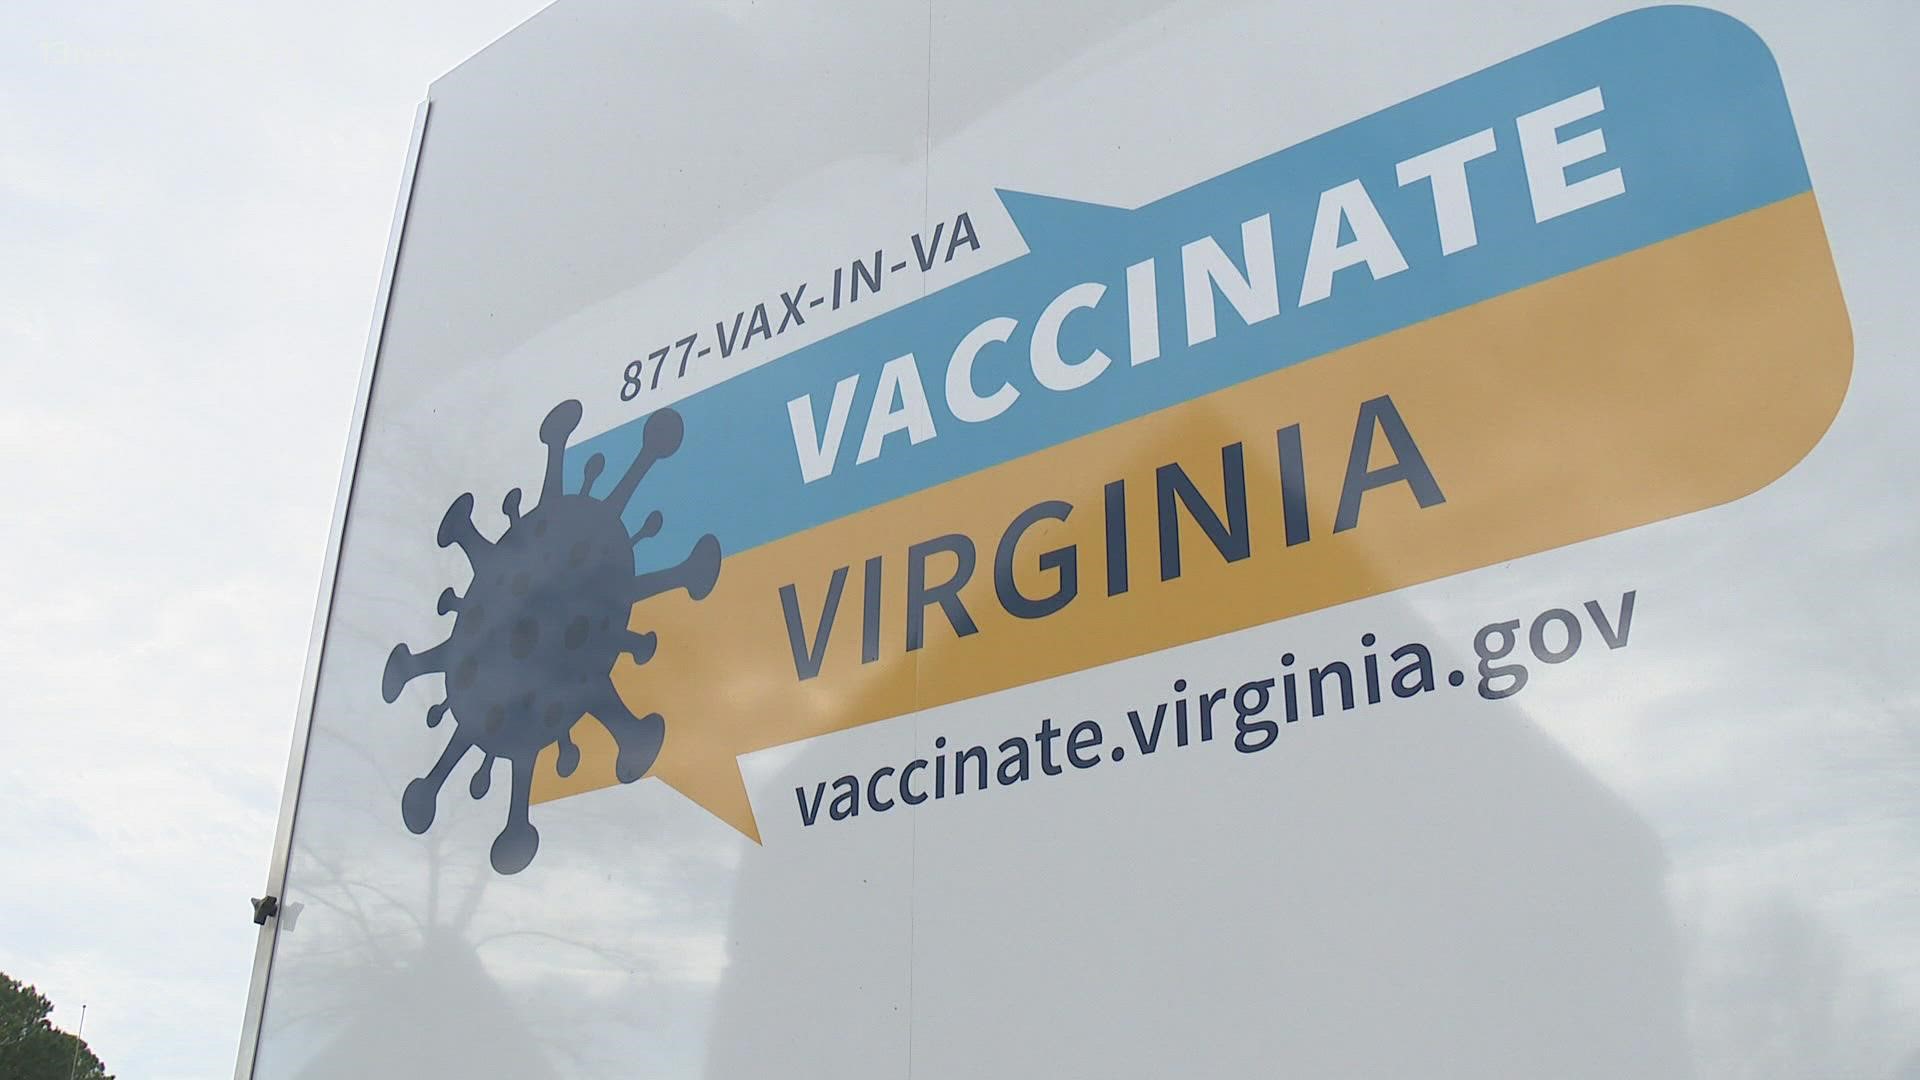 A new acting health director said her team would be willing to get creative, and mobilize, to boost vaccinations in the city.